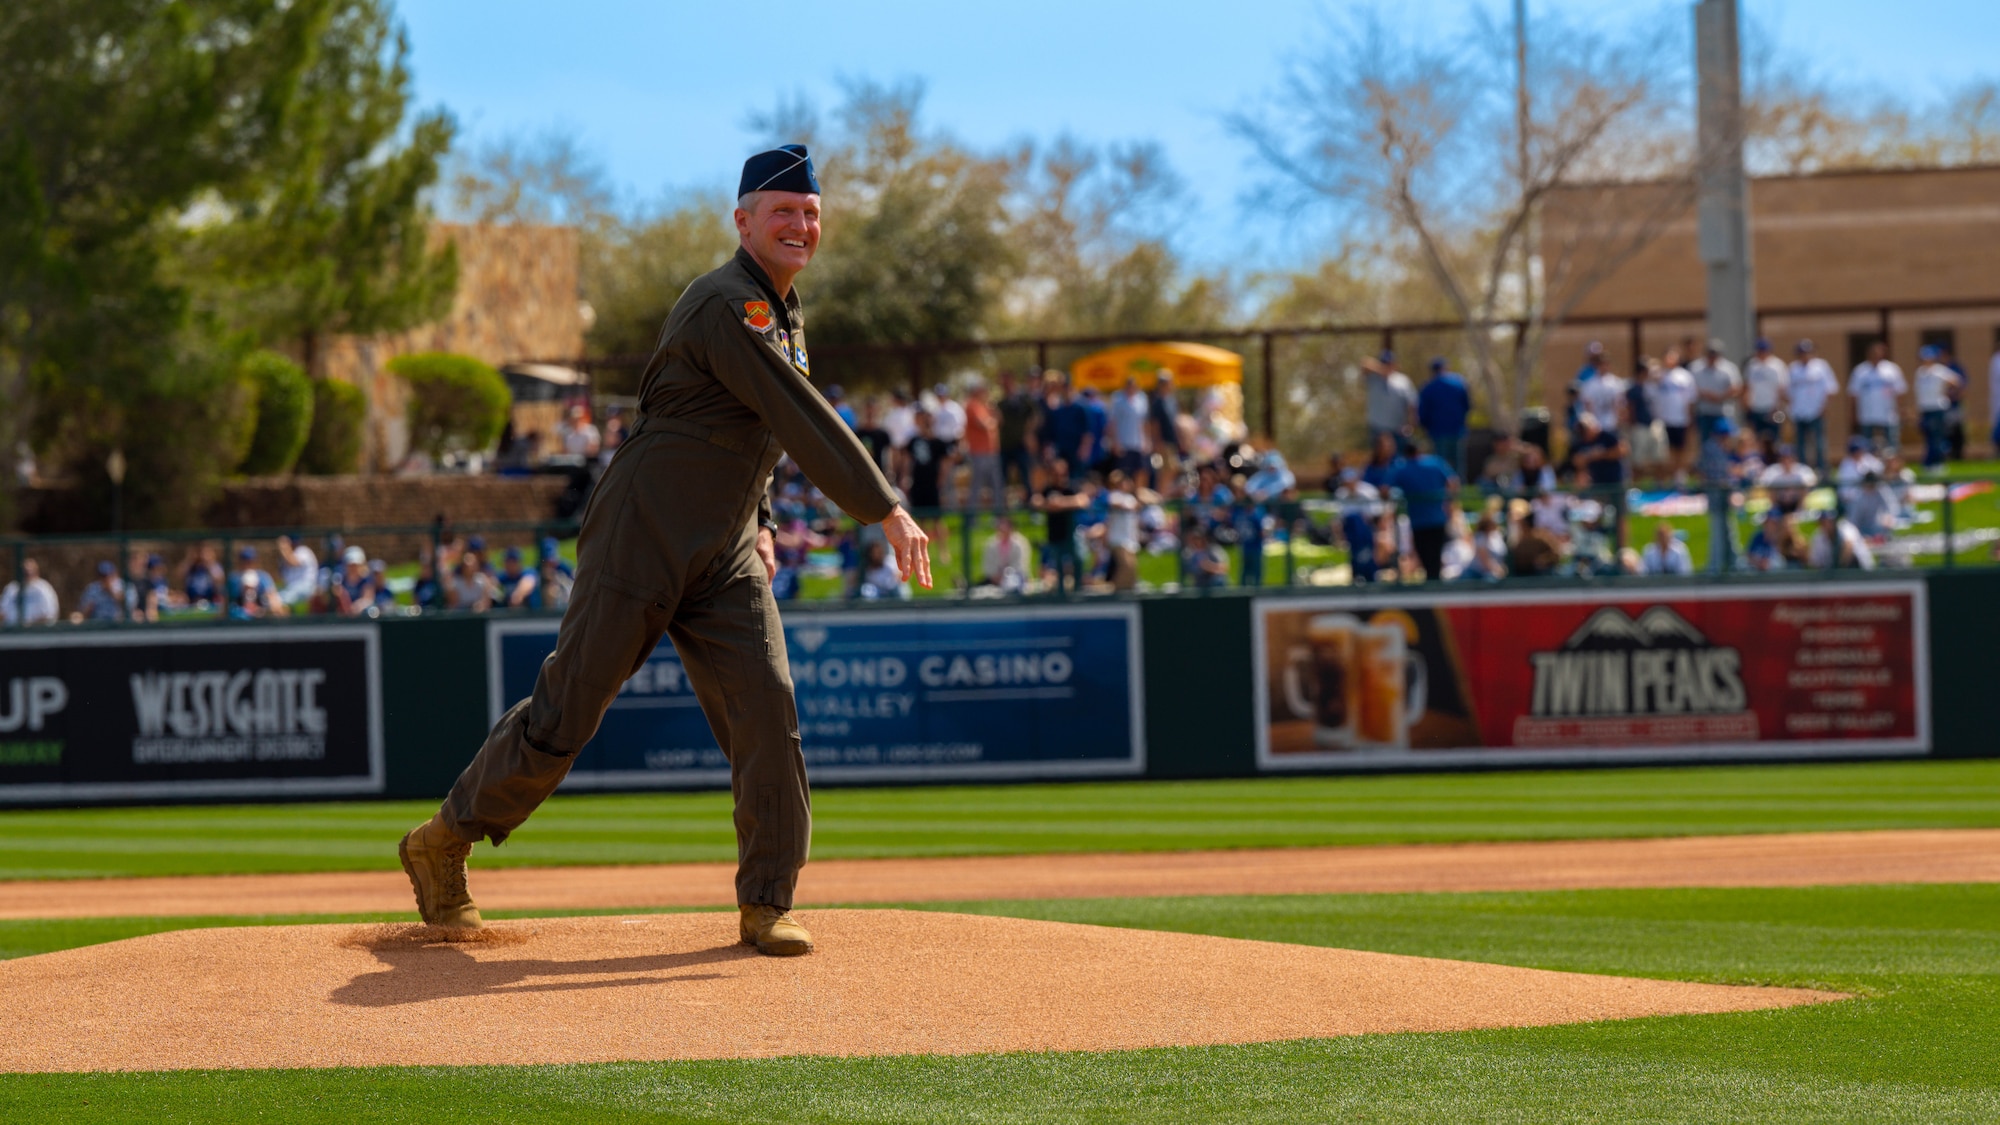 U.S. Air Force Brig. Gen. Jason Rueschhoff, 56th Fighter Wing commander, throws the ceremonial first pitch, March 5, 2023, at Camelback Ranch in Glendale, Arizona.